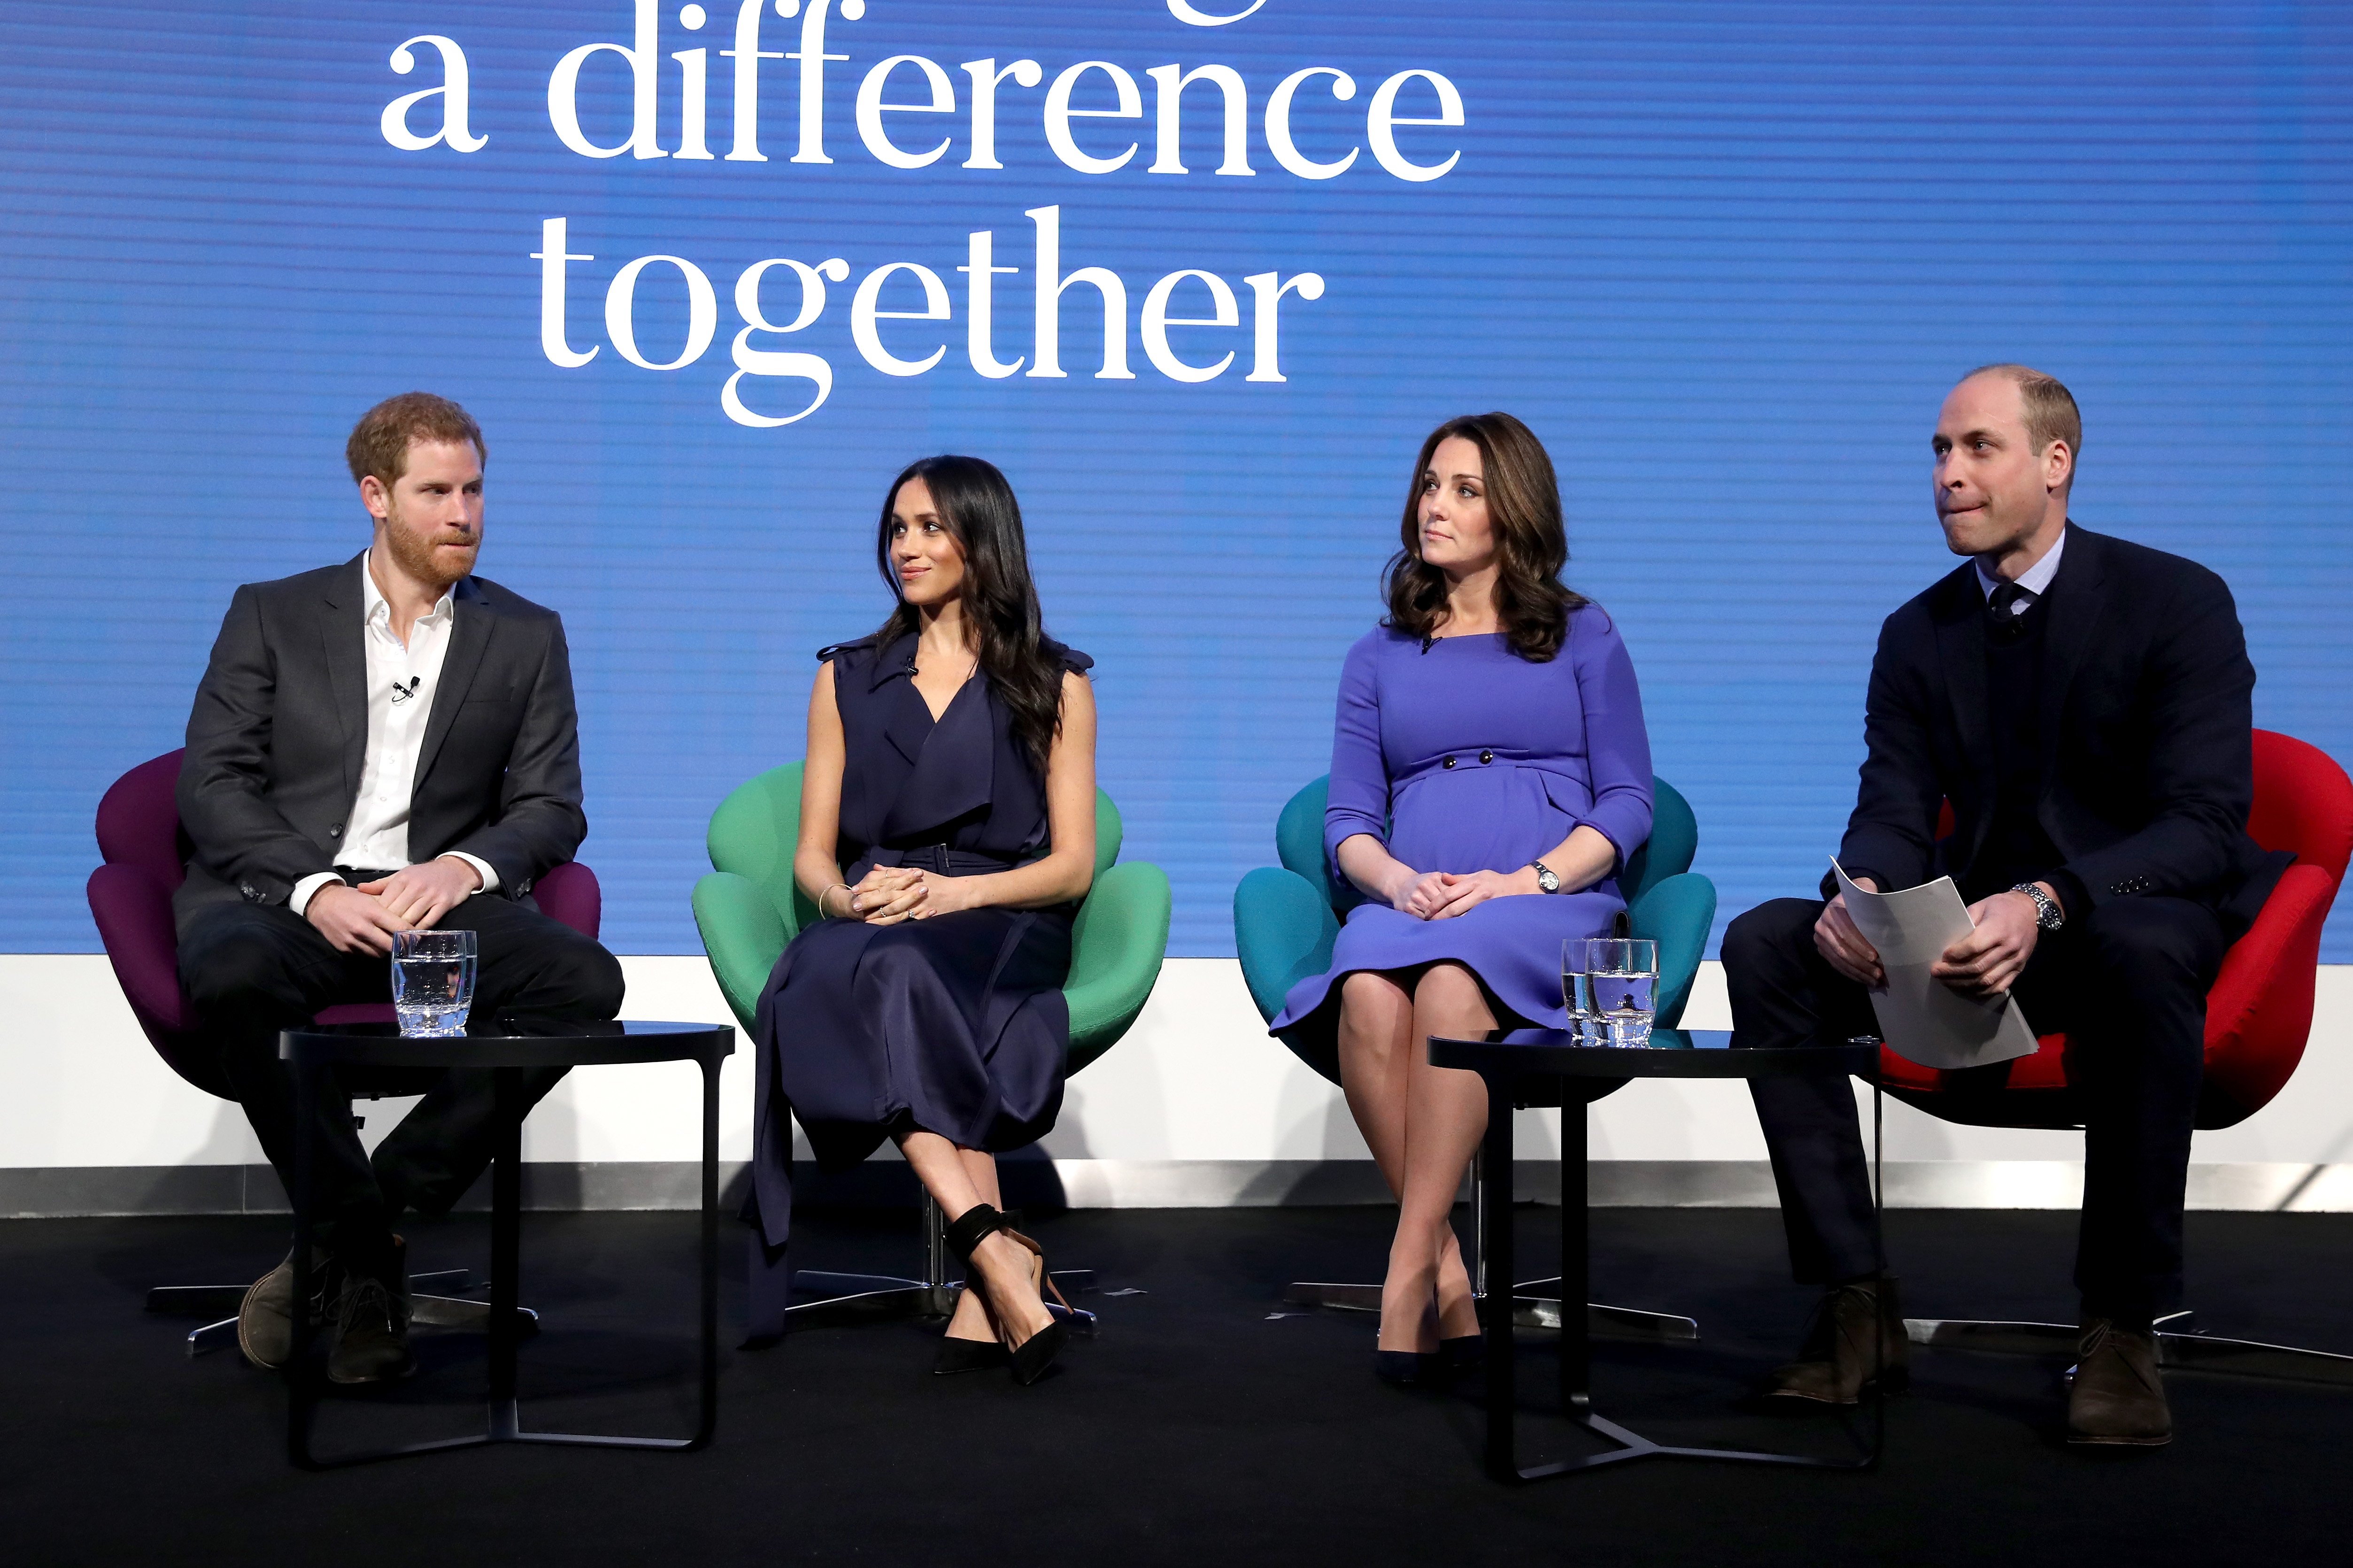 Prince Harry, Meghan Markle, Kate Middleton, and Prince William during the first annual Royal Foundation Forum on February 28, 2018 in London. / Source: Getty Images